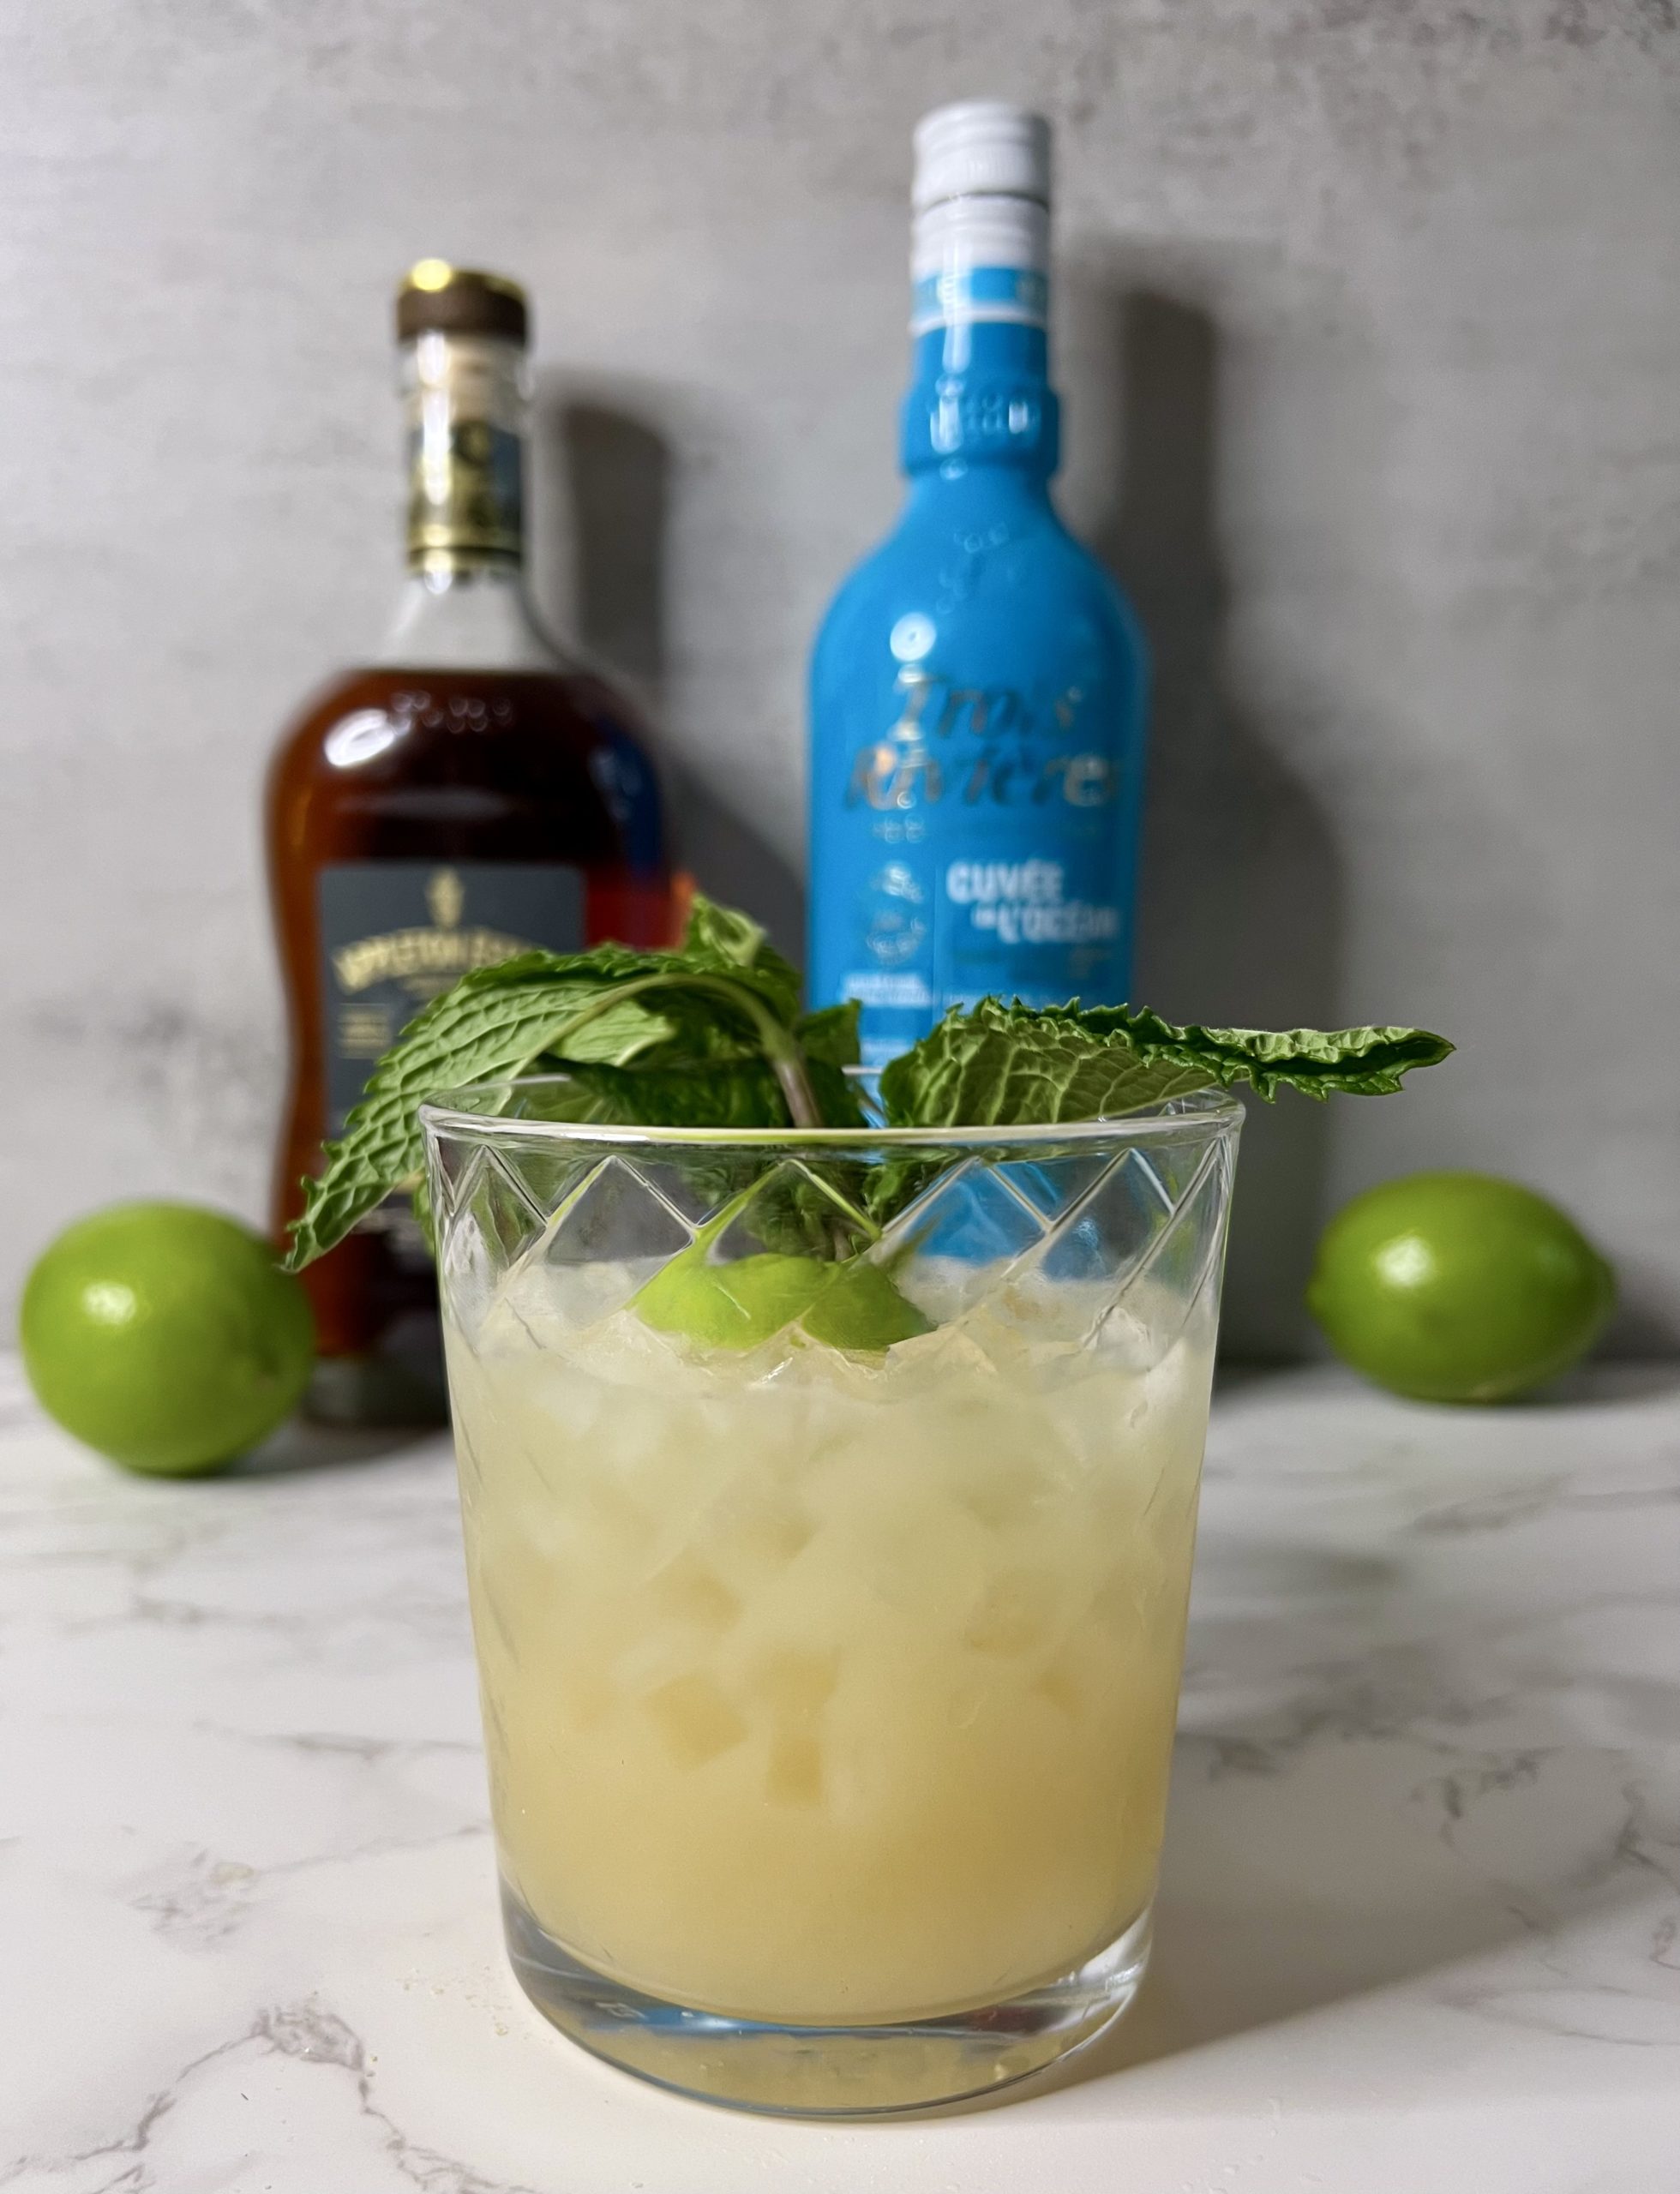 A Mai Tai garnished with a lime half and big sprig of mint in the foreground with two bottles of Caribbean rum and limes in the background.